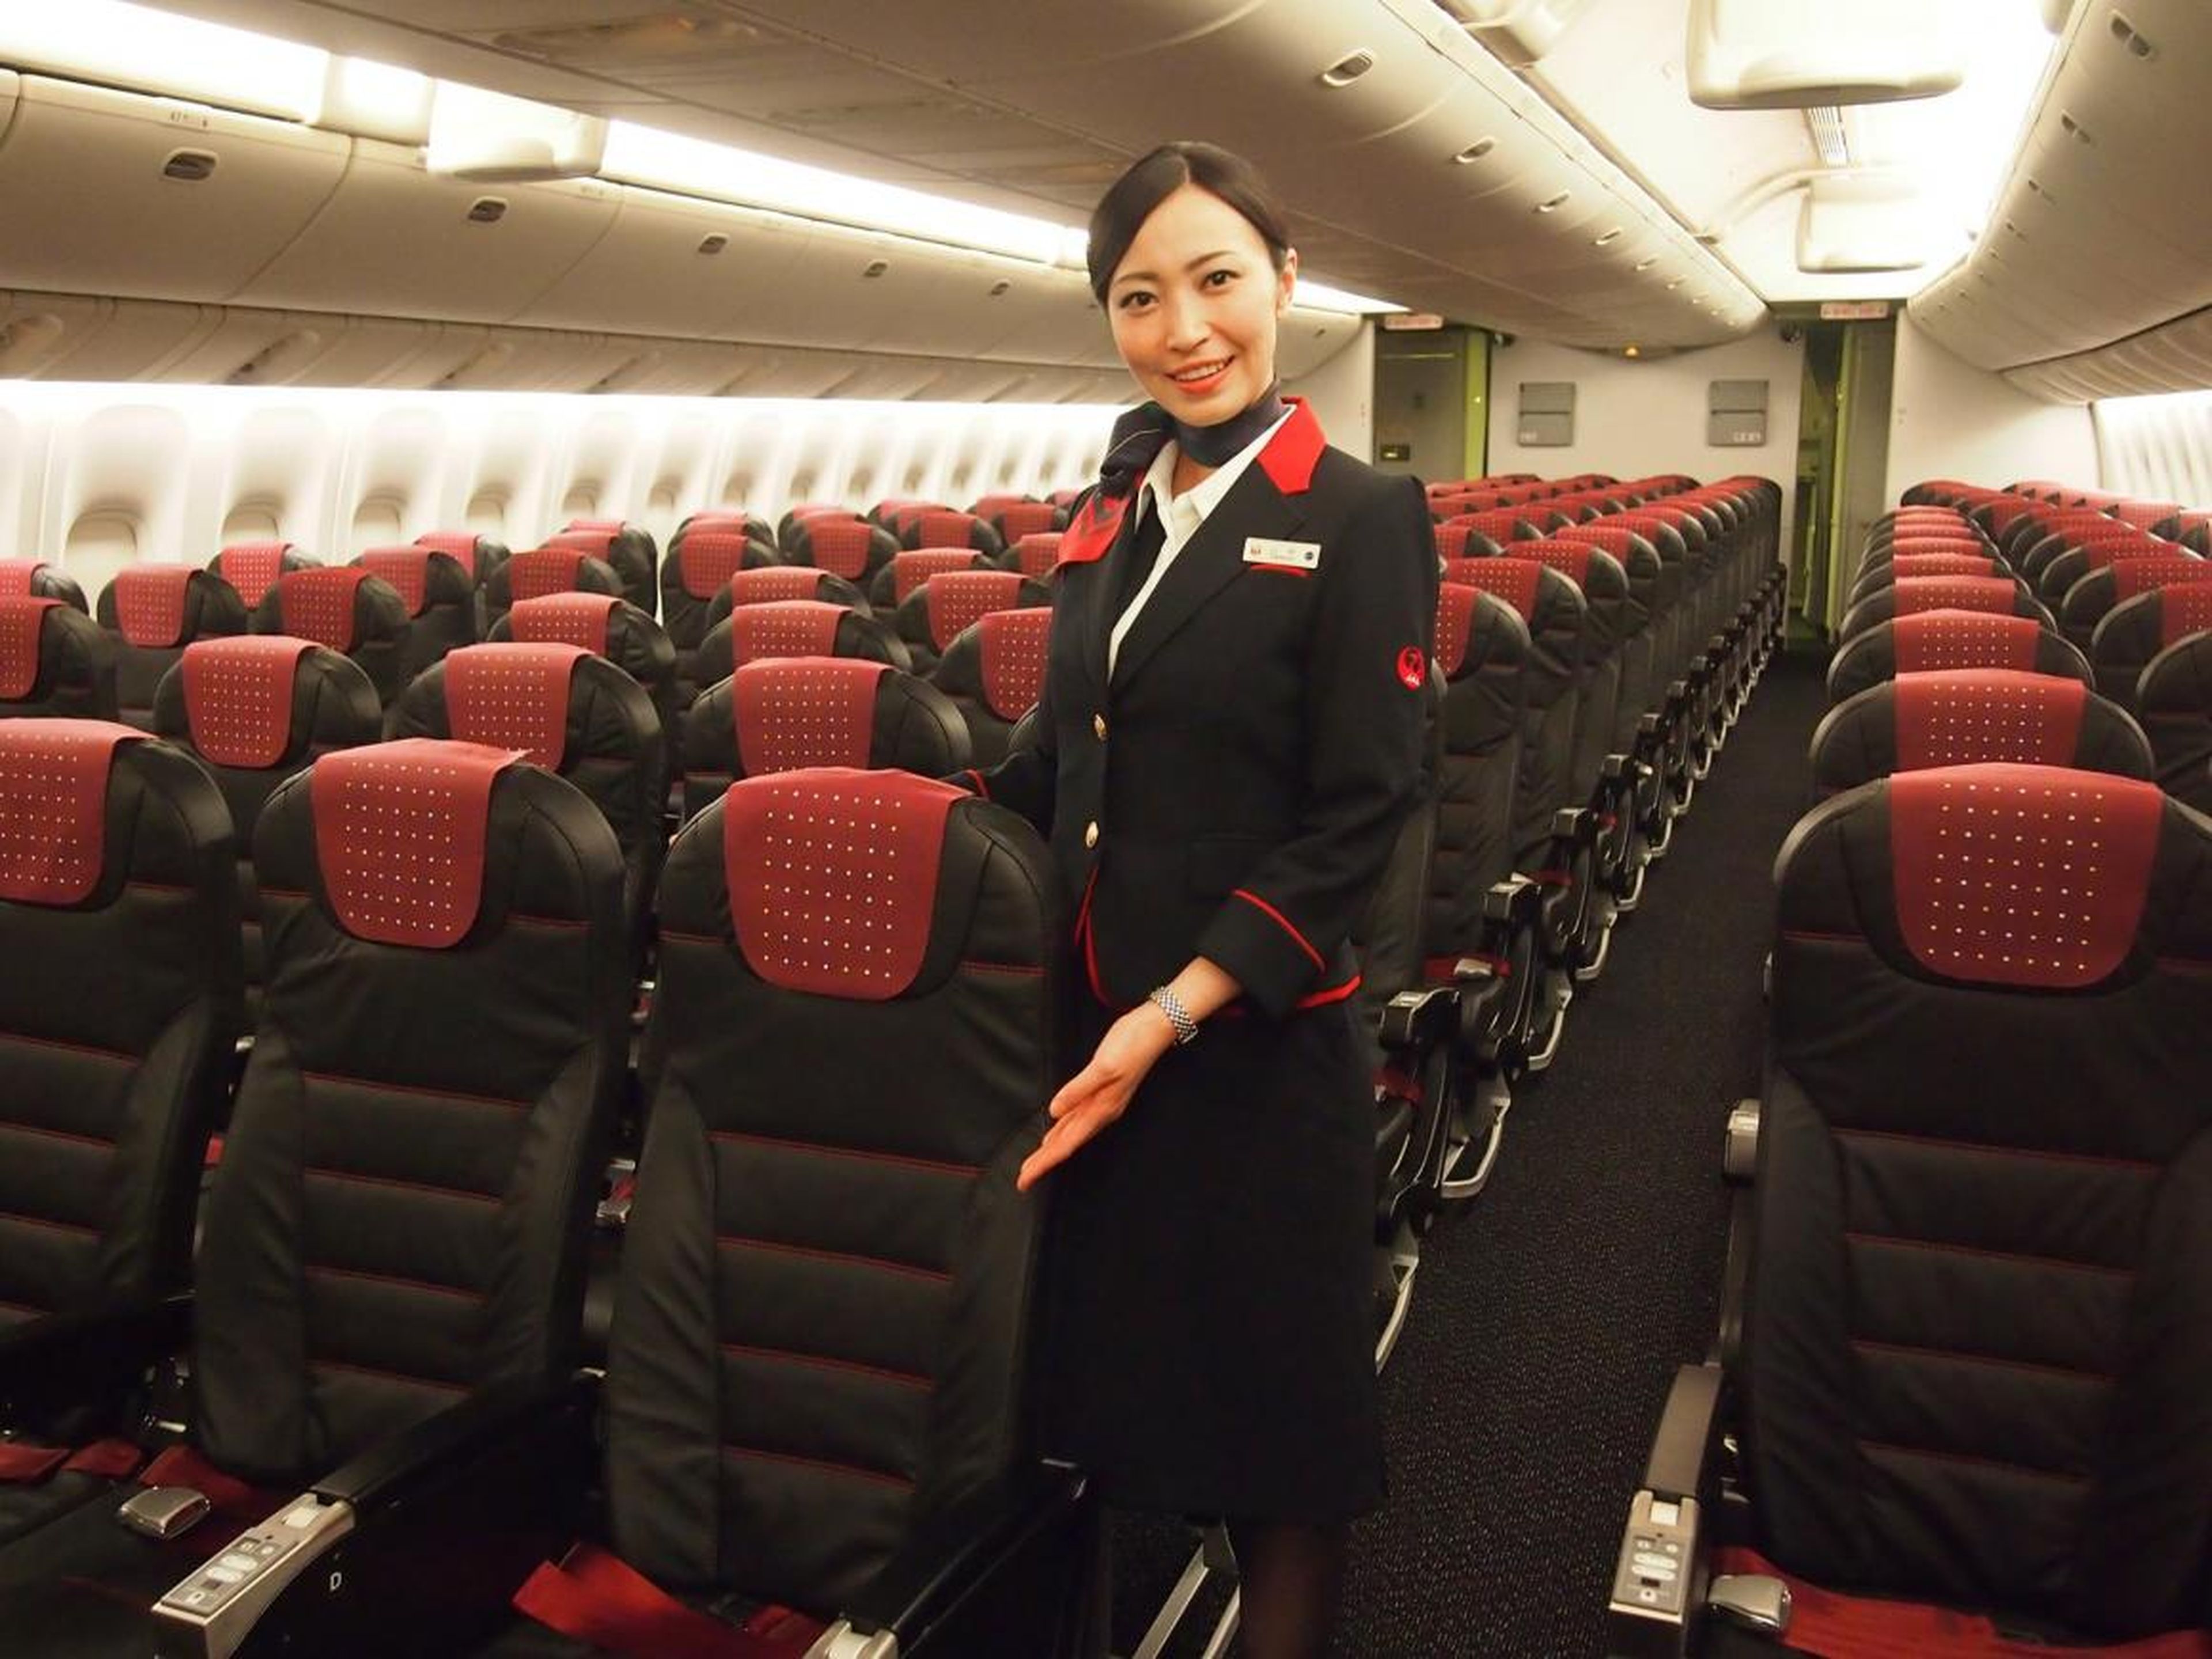 10. Japan Airlines